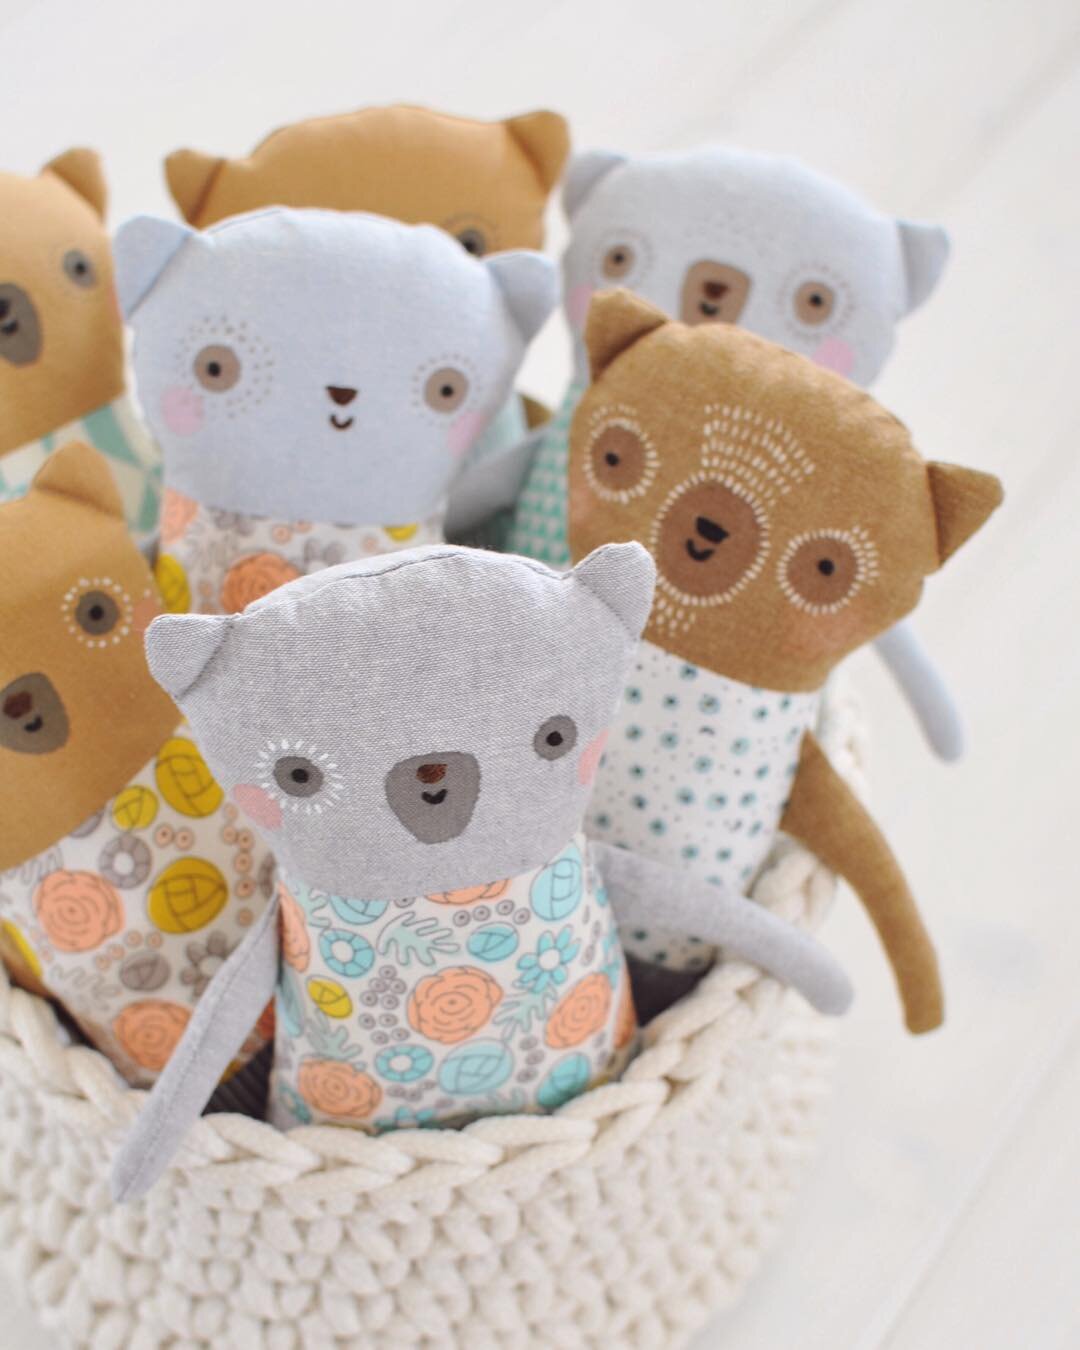 Finishing up a basket full of sweet one-of-kind bears for our mini shop update...coming next week (at last)!